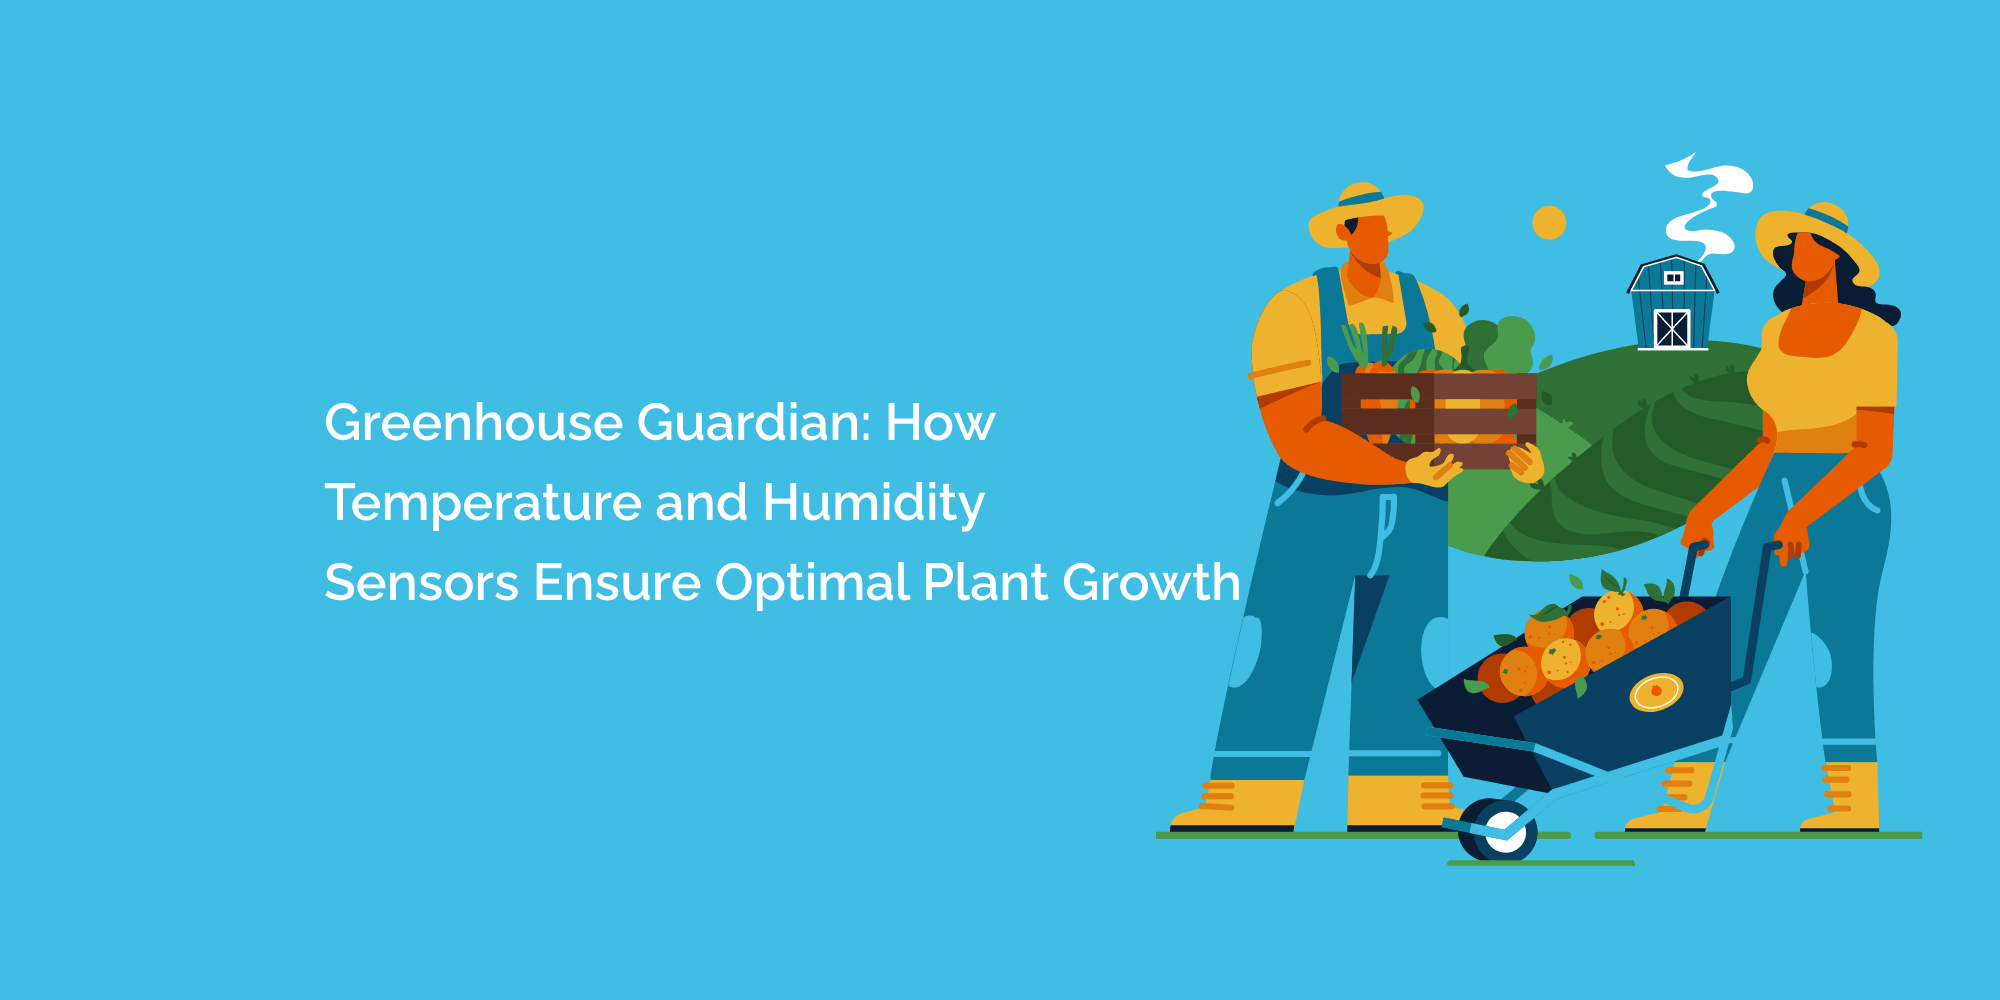 Greenhouse Guardian: How Temperature and Humidity Sensors Ensure Optimal Plant Growth